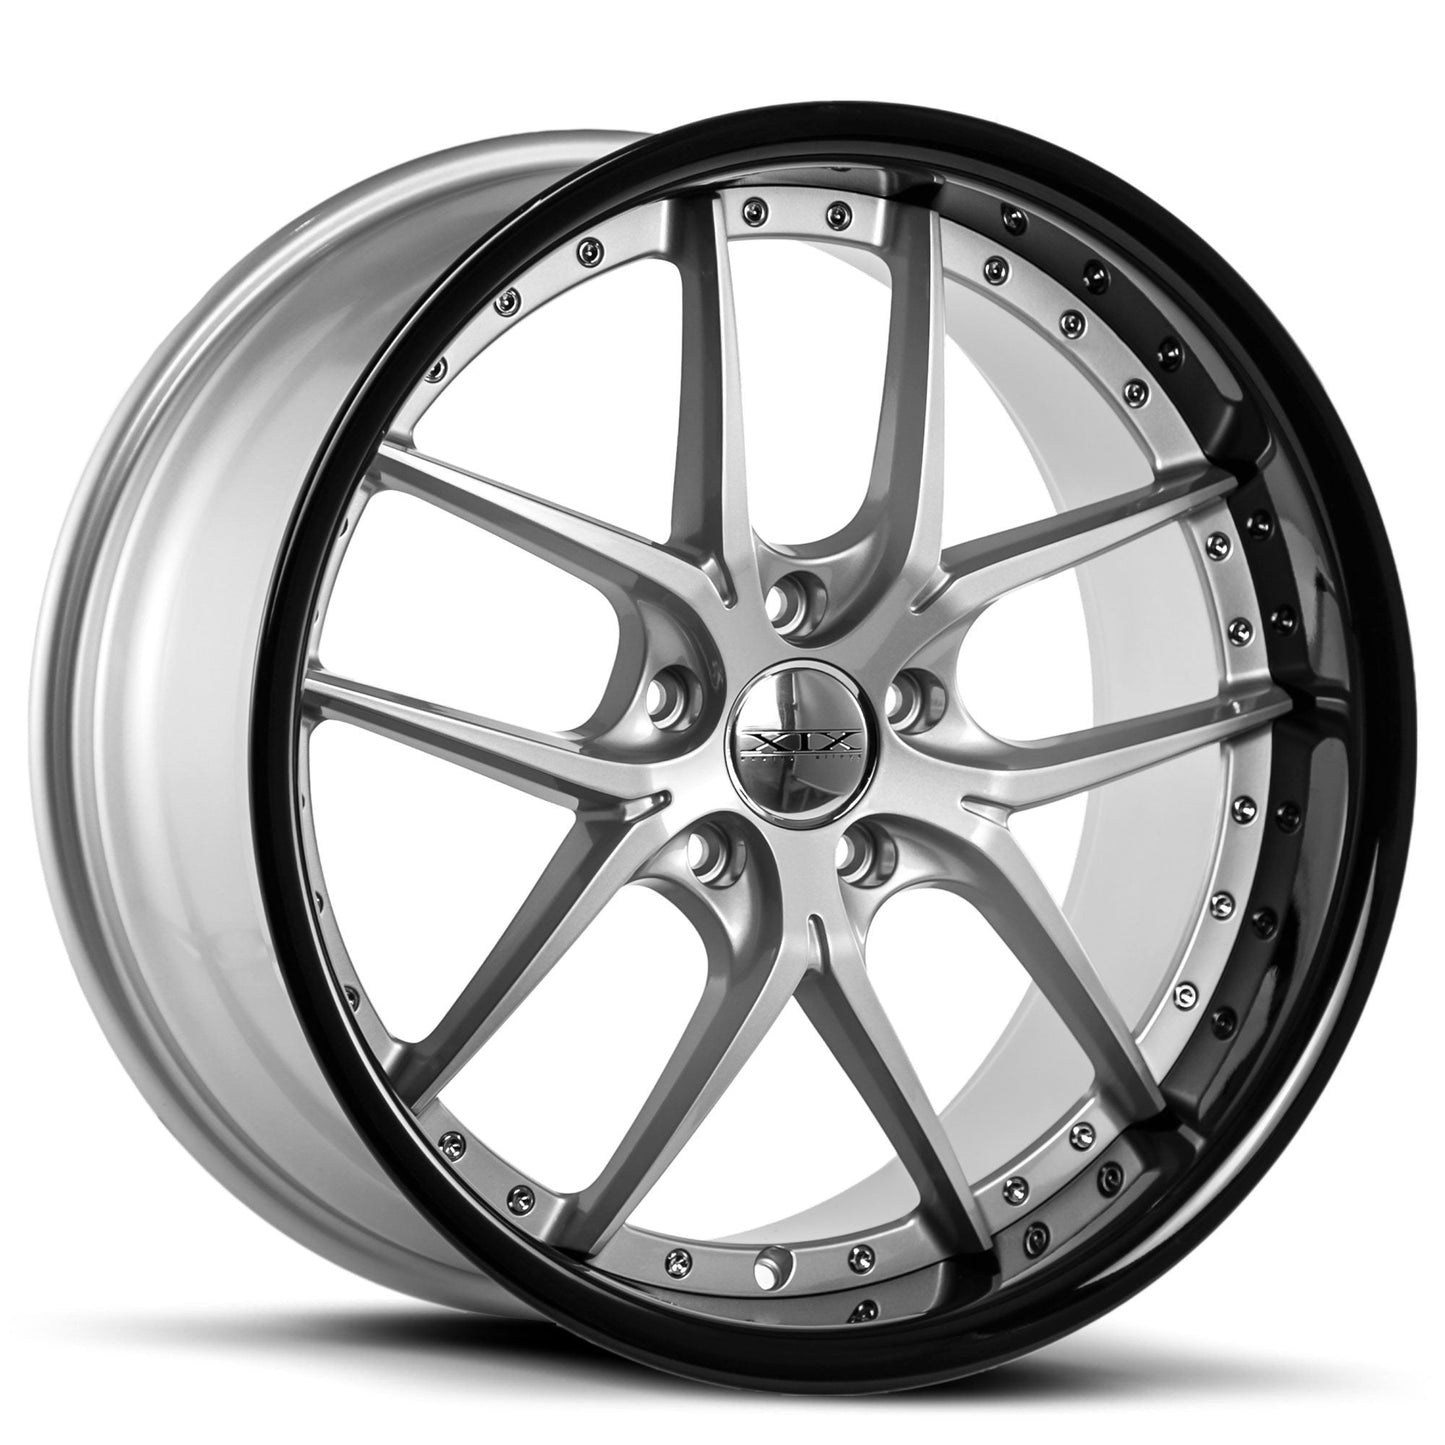 XIX-X61-Silver-Machined-with-Stainless-Steel-Lip-Silver-20x8.5-72.56-wheels-rims-felger-Felghuset